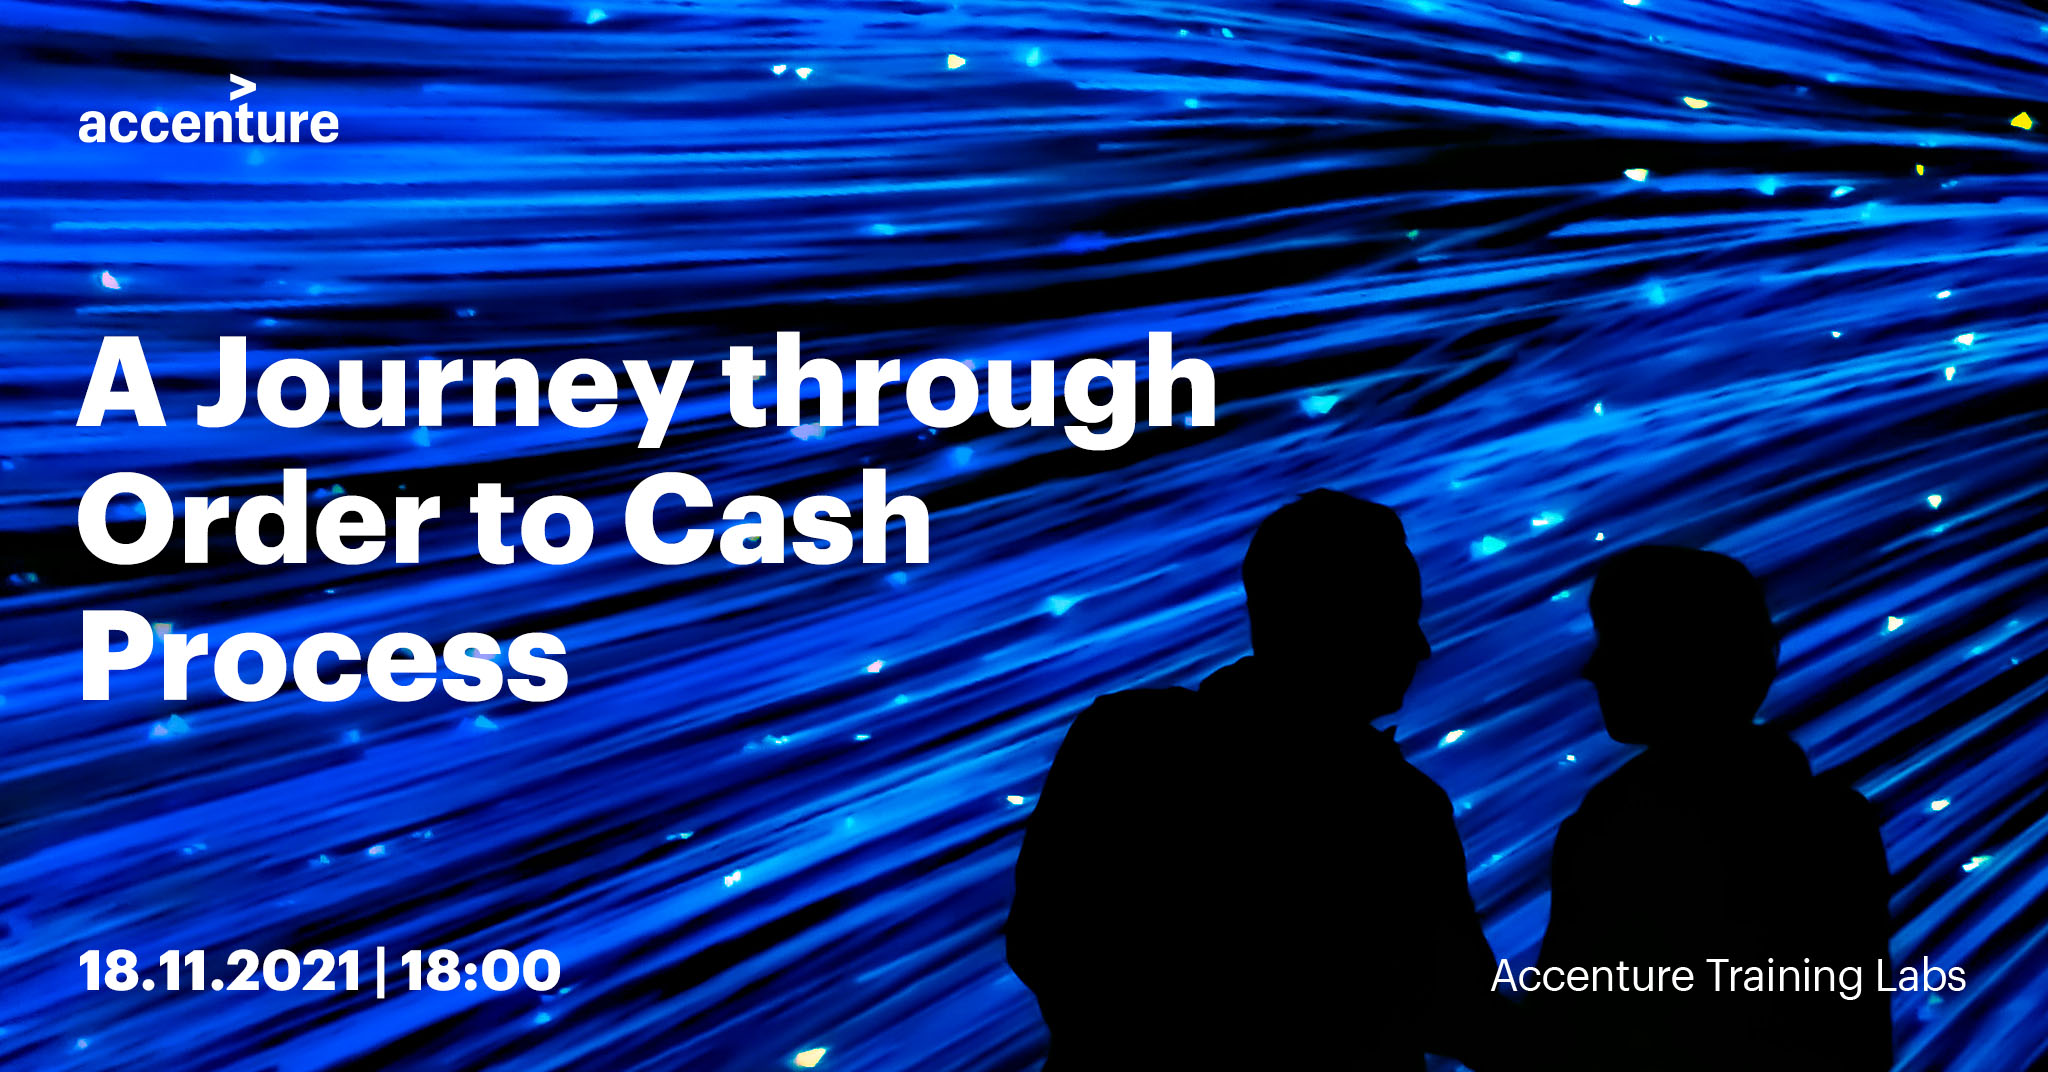 A journey through Order to Cash